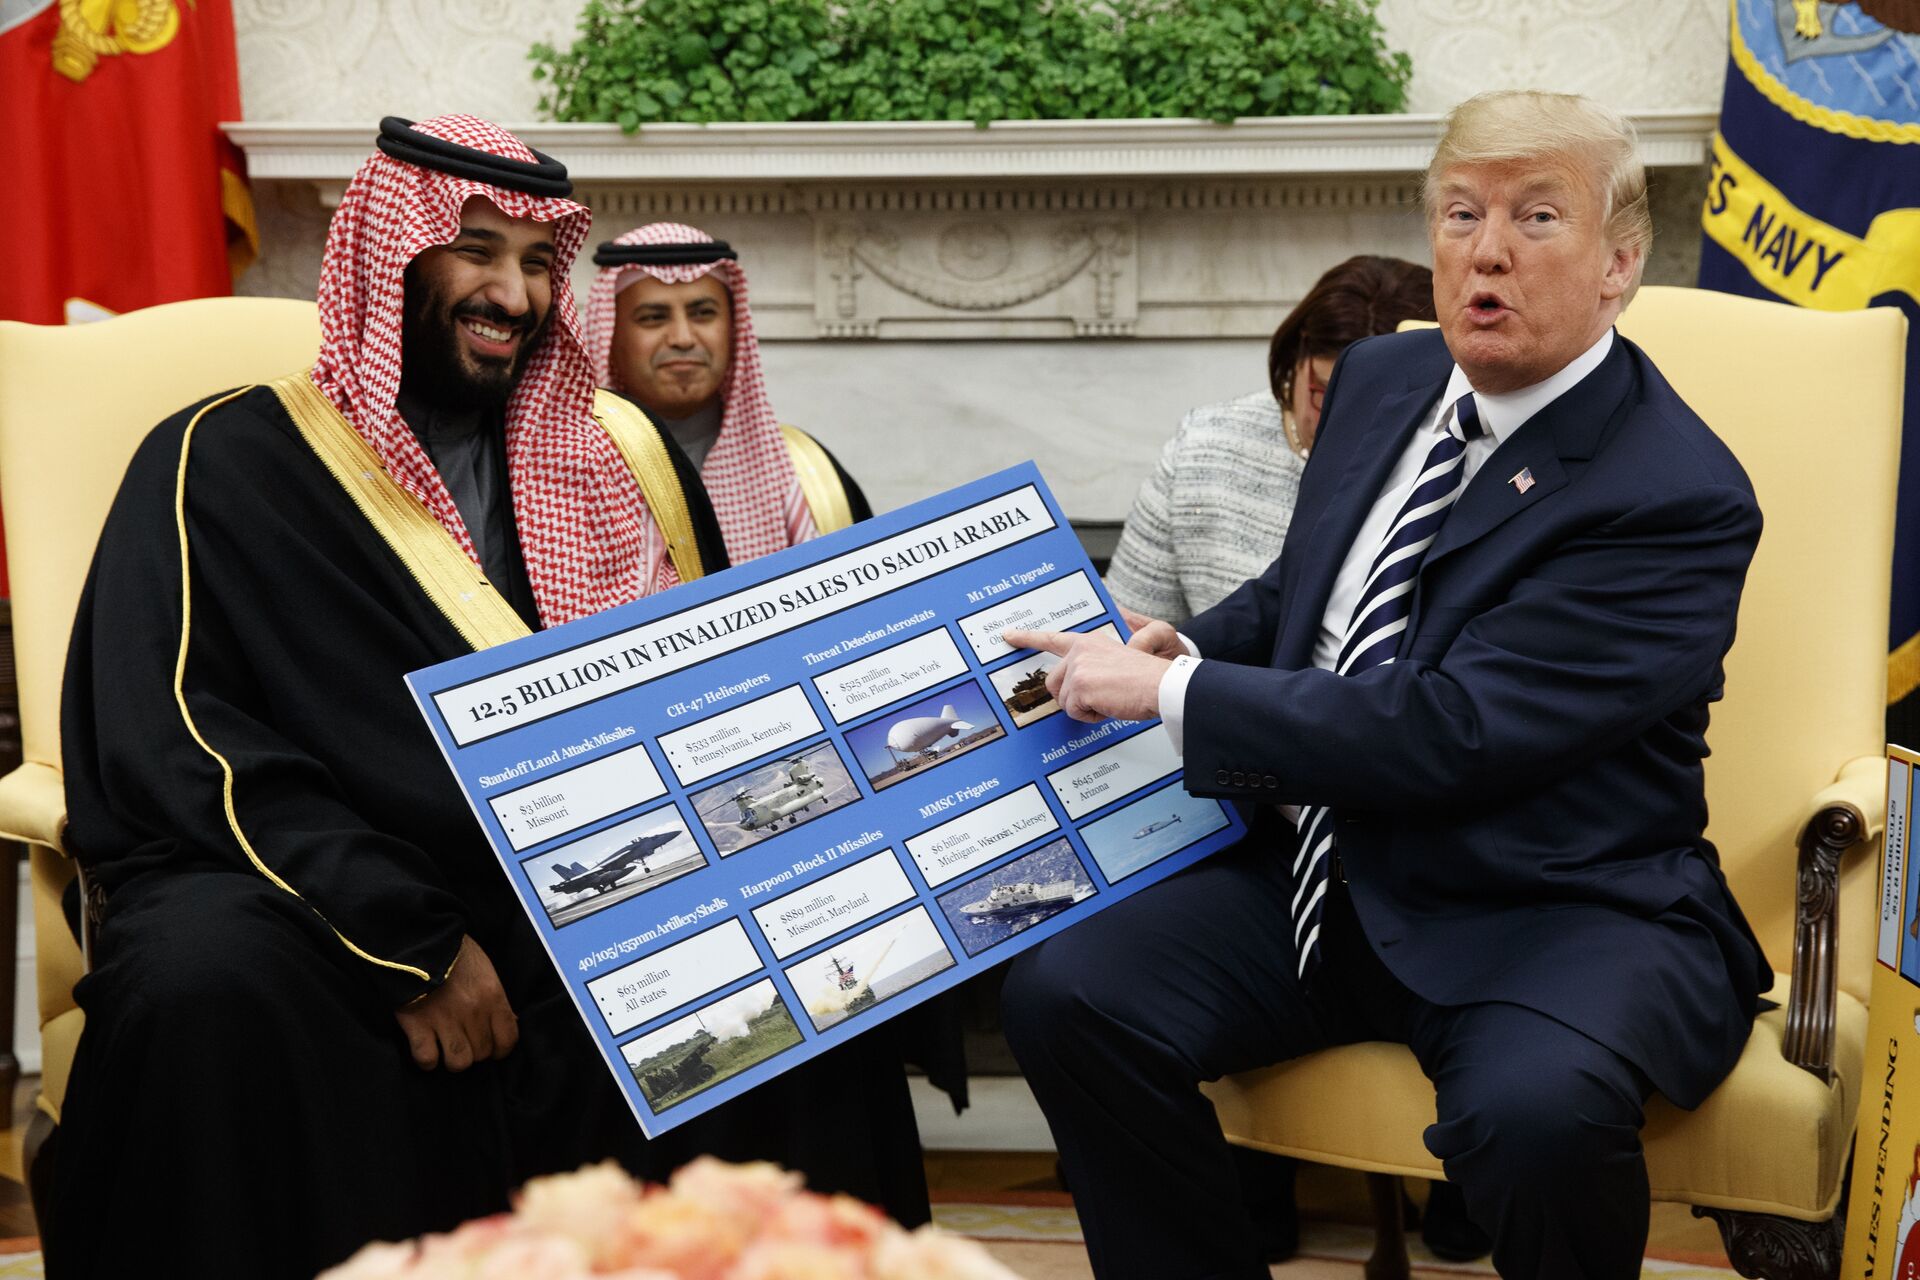 President Donald Trump shows a chart highlighting arms sales to Saudi Arabia during a meeting with Saudi Crown Prince Mohammed bin Salman in the Oval Office of the White House, Tuesday, March 20, 2018, in Washington - Sputnik International, 1920, 13.09.2021